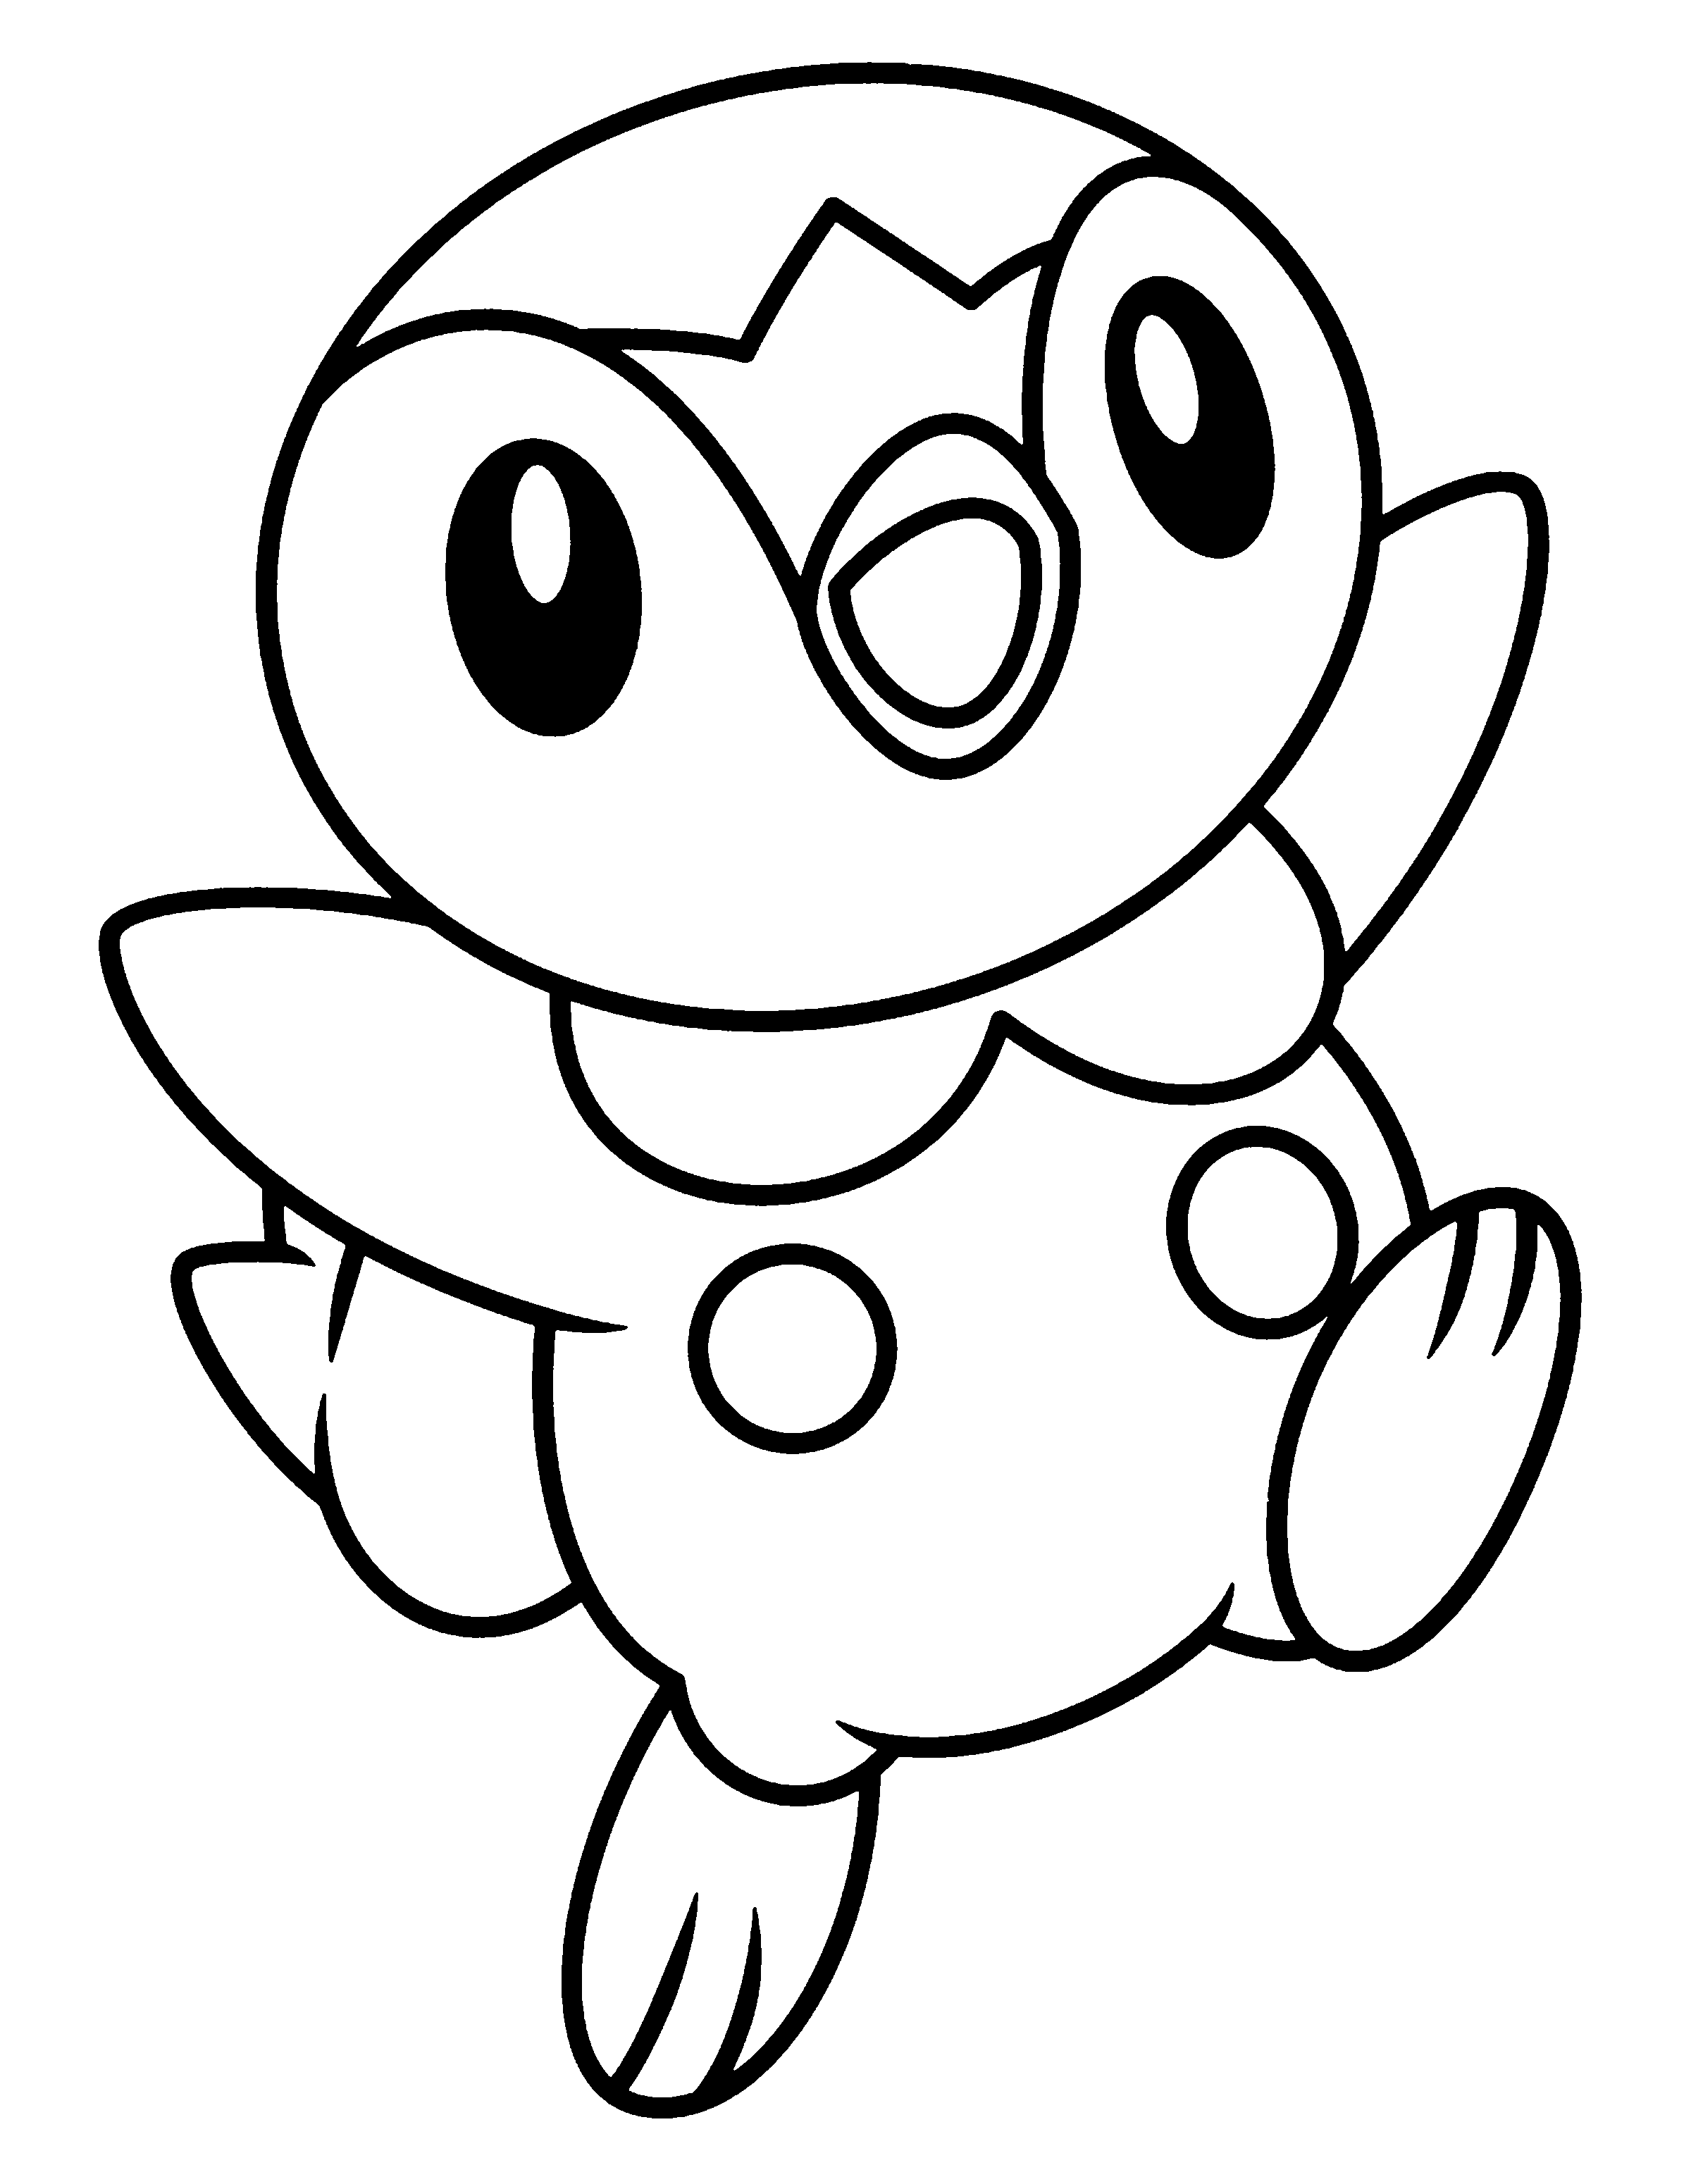 Pokemon Black And White S - Coloring Pages for Kids and for Adults